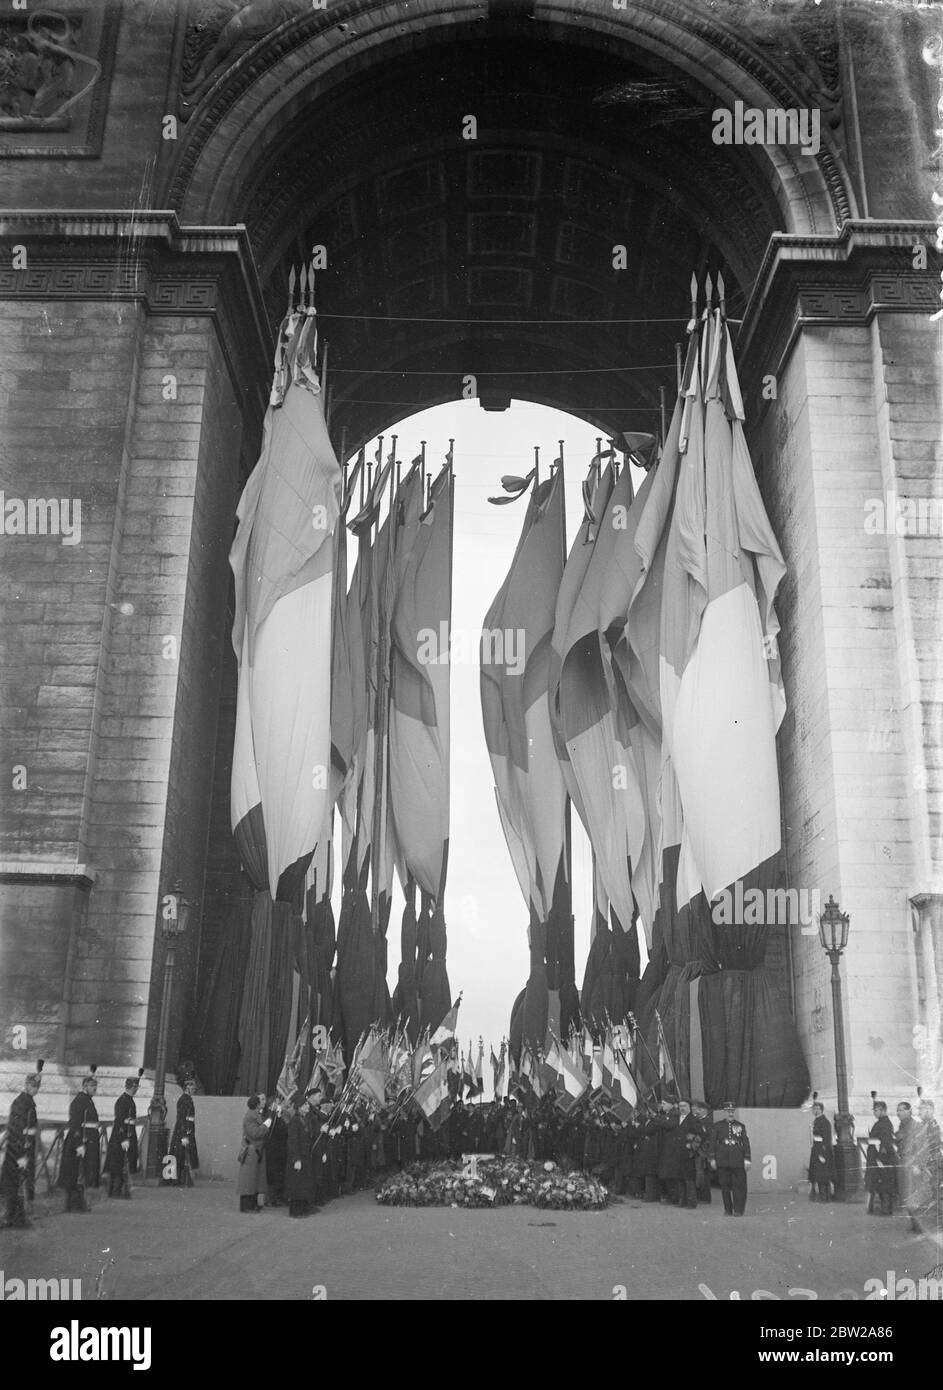 War regiments standard on the Arc de Triumphe President LeBrun, with members of the Cabinet and ex-servicemen, attended the Armistice Day service at the Arc de Triumphe in Paris. Photo shows, ex-servicemen flags and standards of dissolved regiments on the Arc de Triumphe during the service. 11 November 1937 Stock Photo